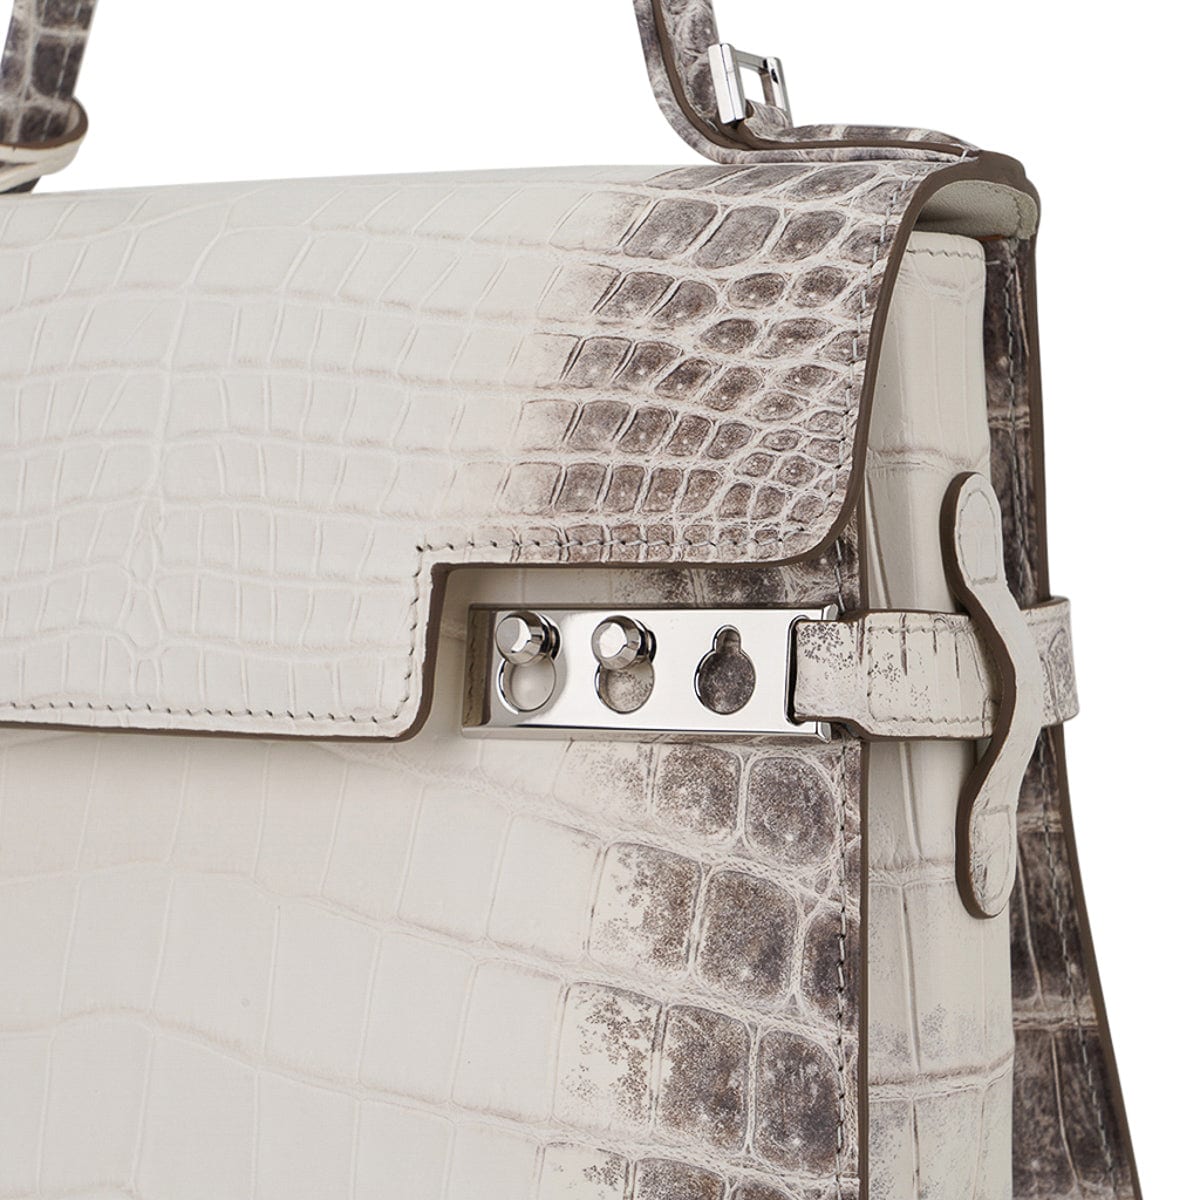 Delvaux Tempete PM Himalaya Crocodile Limited Edition Bag – Mightychic